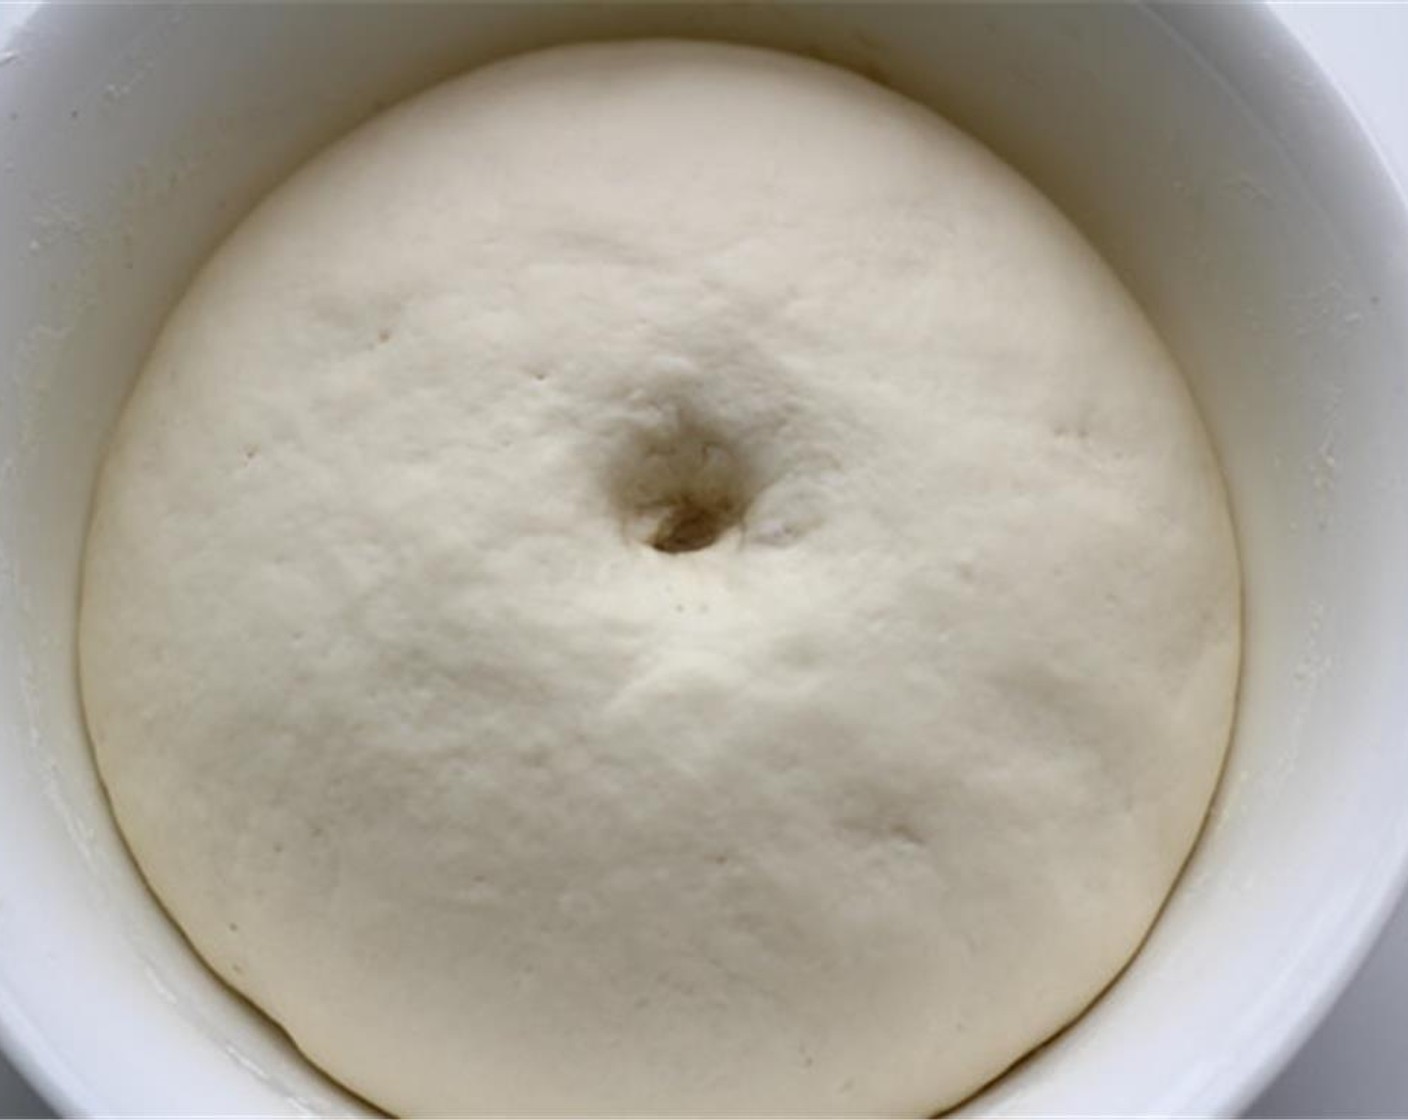 step 4 Cover the bowl and let the dough rest for around 1 hour or until it doubles in size.  Put it in a oven to shorten the time. Preheat the oven to around 35 degrees C (95 degrees F) for fermentation. After 5 minutes, turn the oven off. And leave the bowl in.